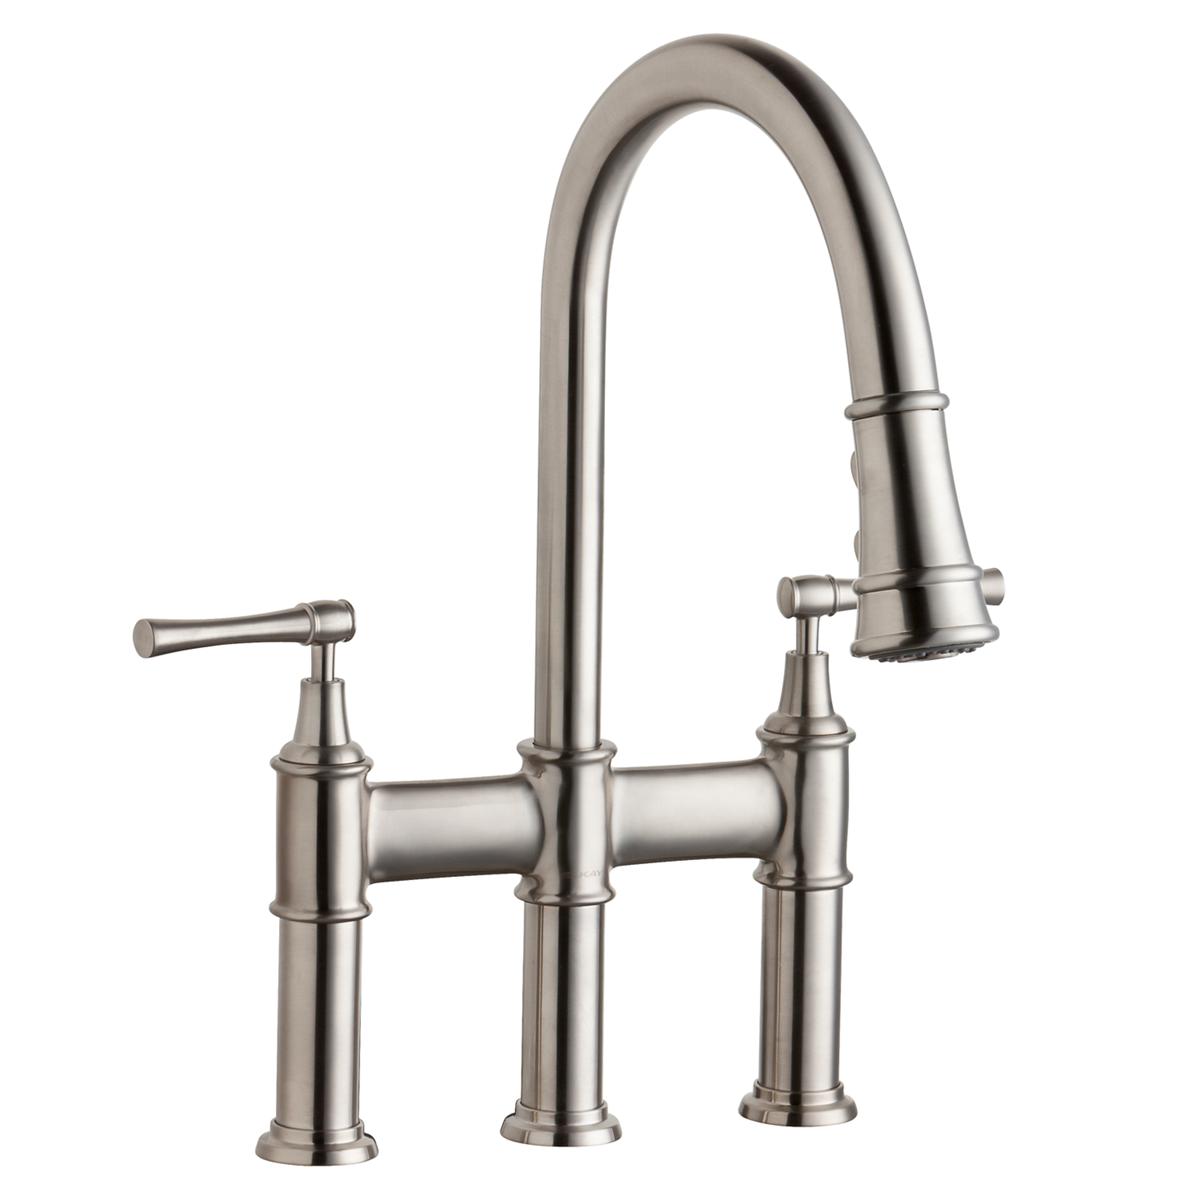 Elkay Explore Three Hole Bridge Faucet with Pull-down Spray and Lever Handles